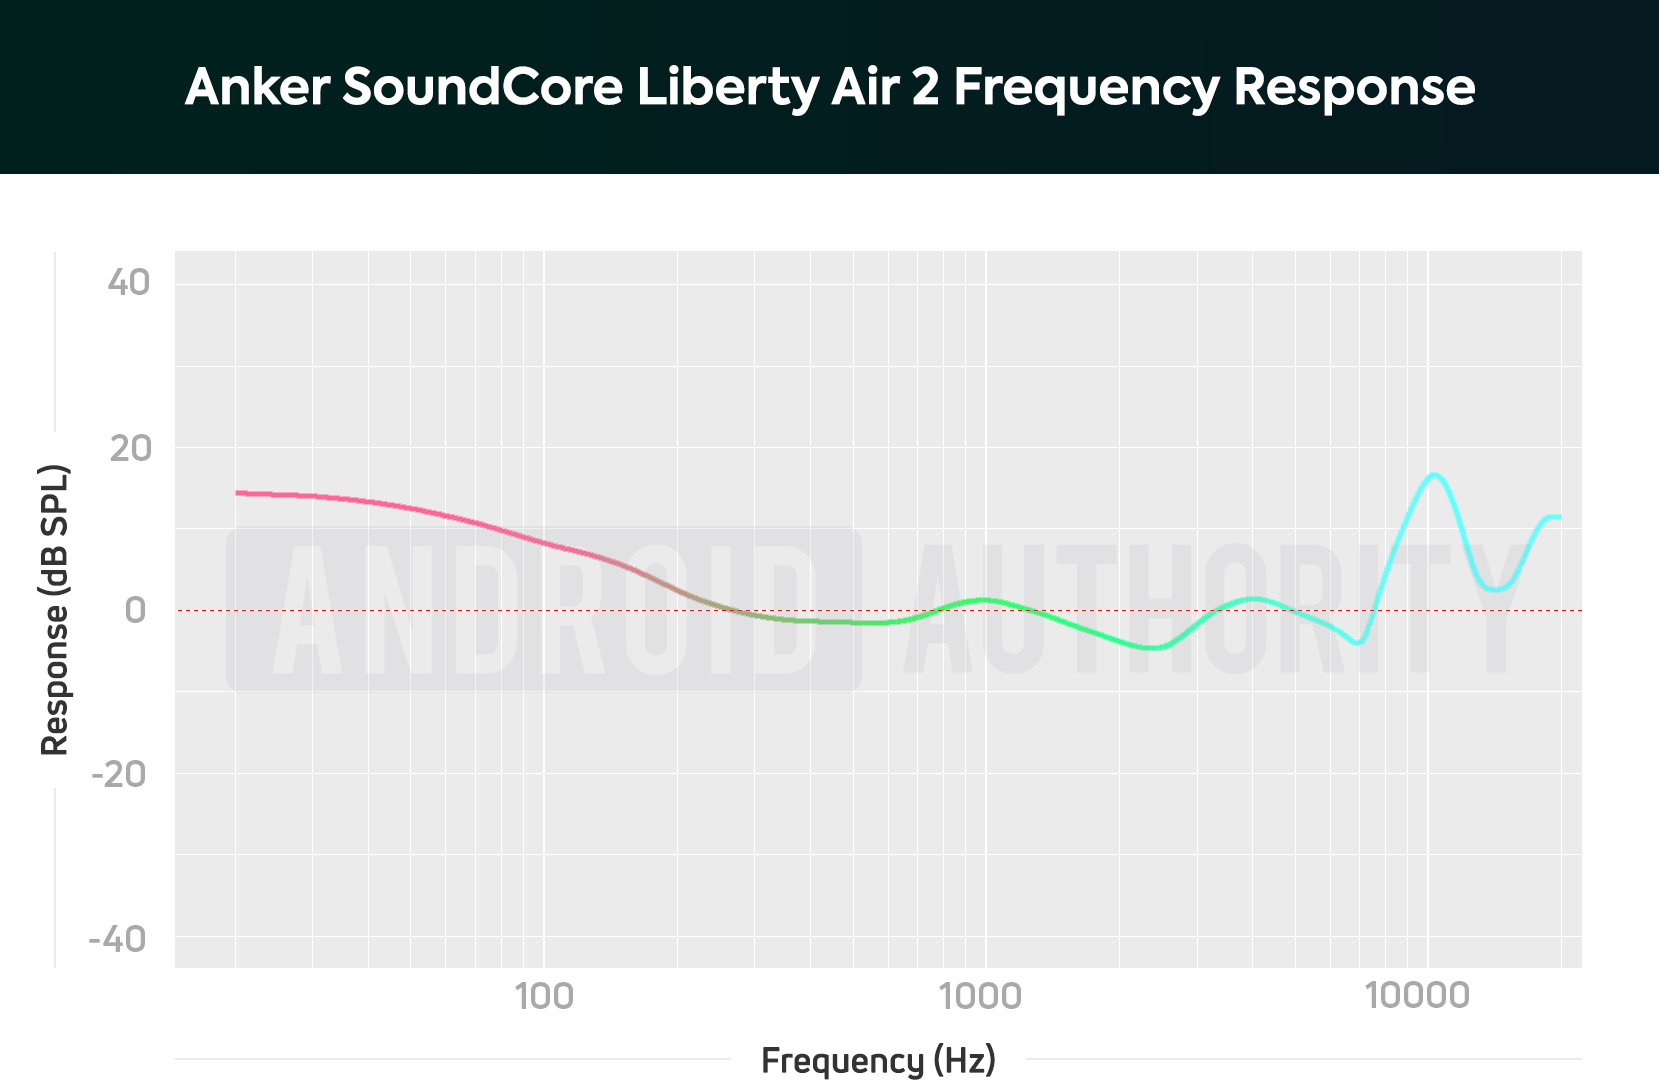 A chart depicting the Anker SoundCore Liberty Air 2 true wireless earbuds' frequency response.